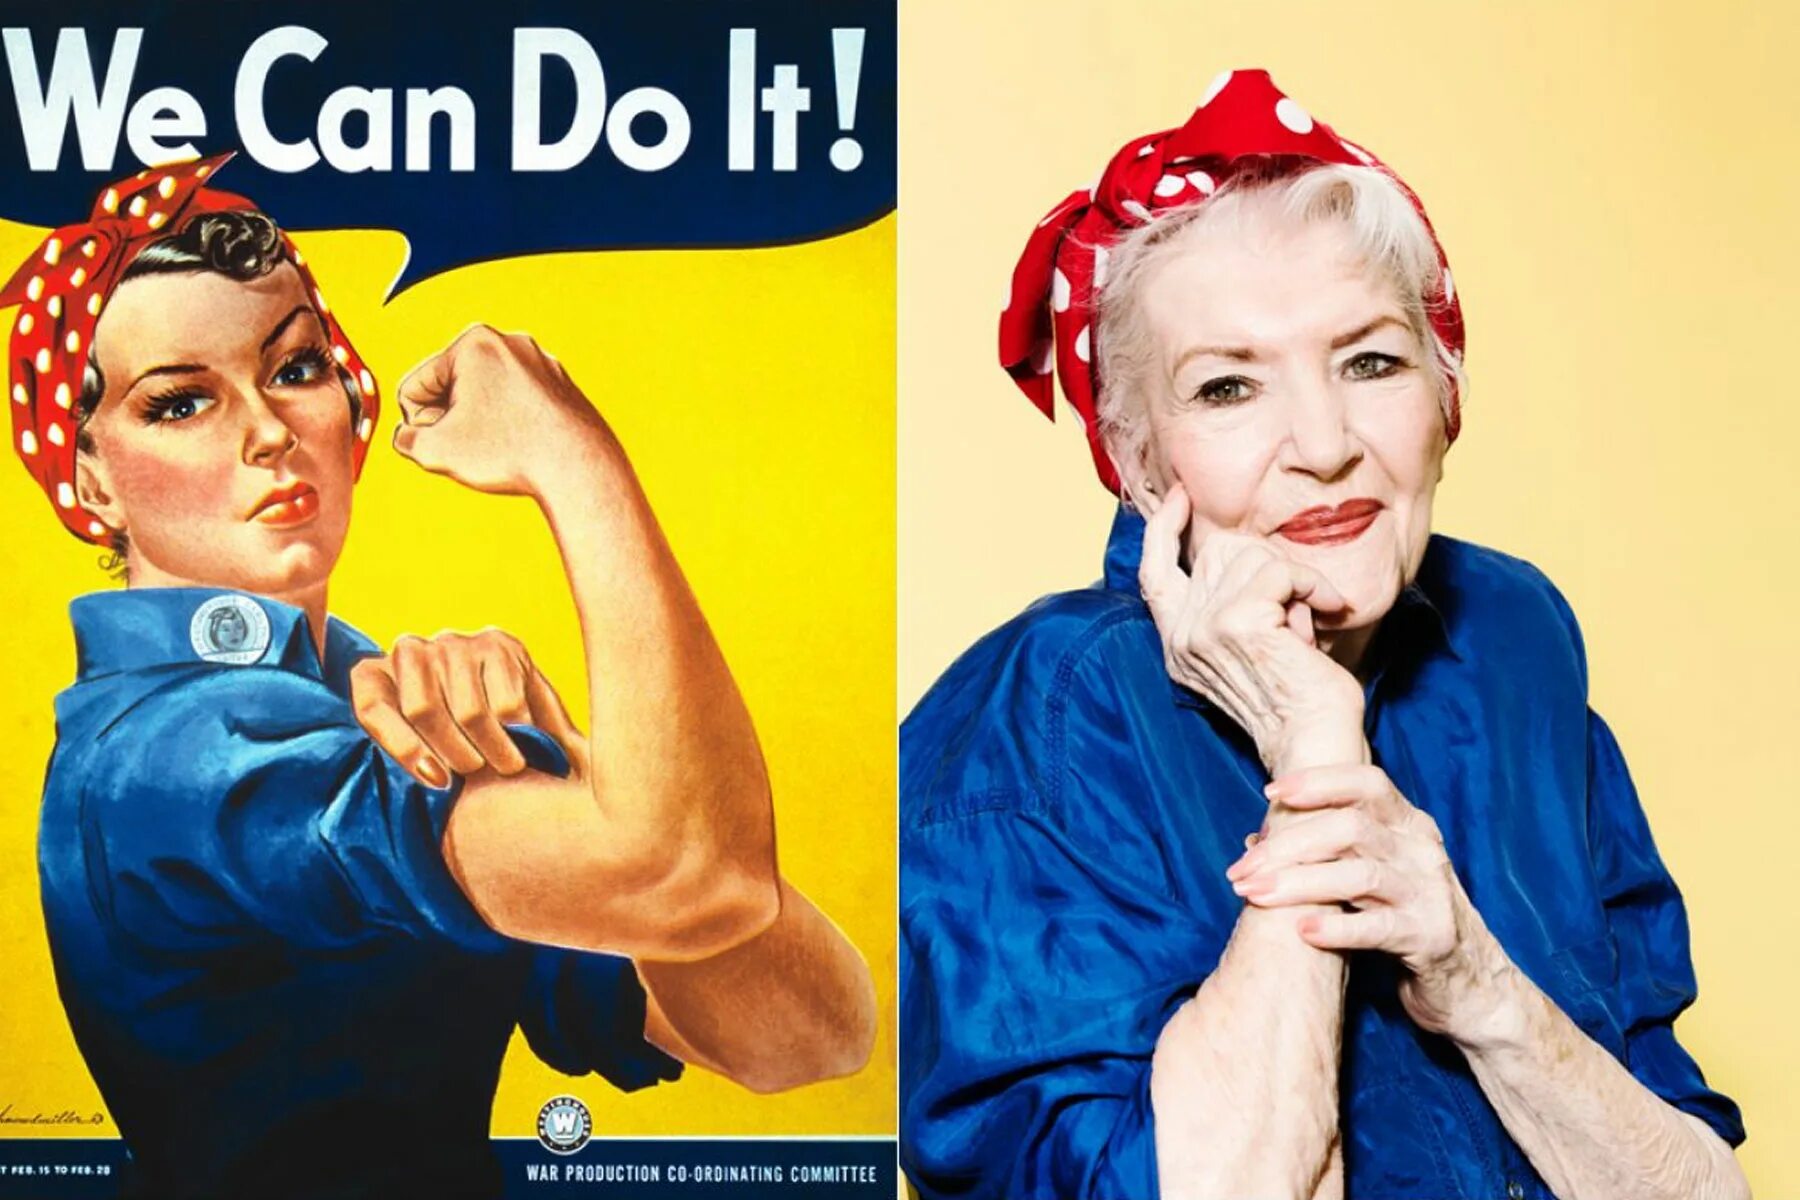 Of course we can. Рози Клепальщица Рокуэлл. Клепальщицы Рози (Rosie the Riveter). Клепальщица Рози плакат.